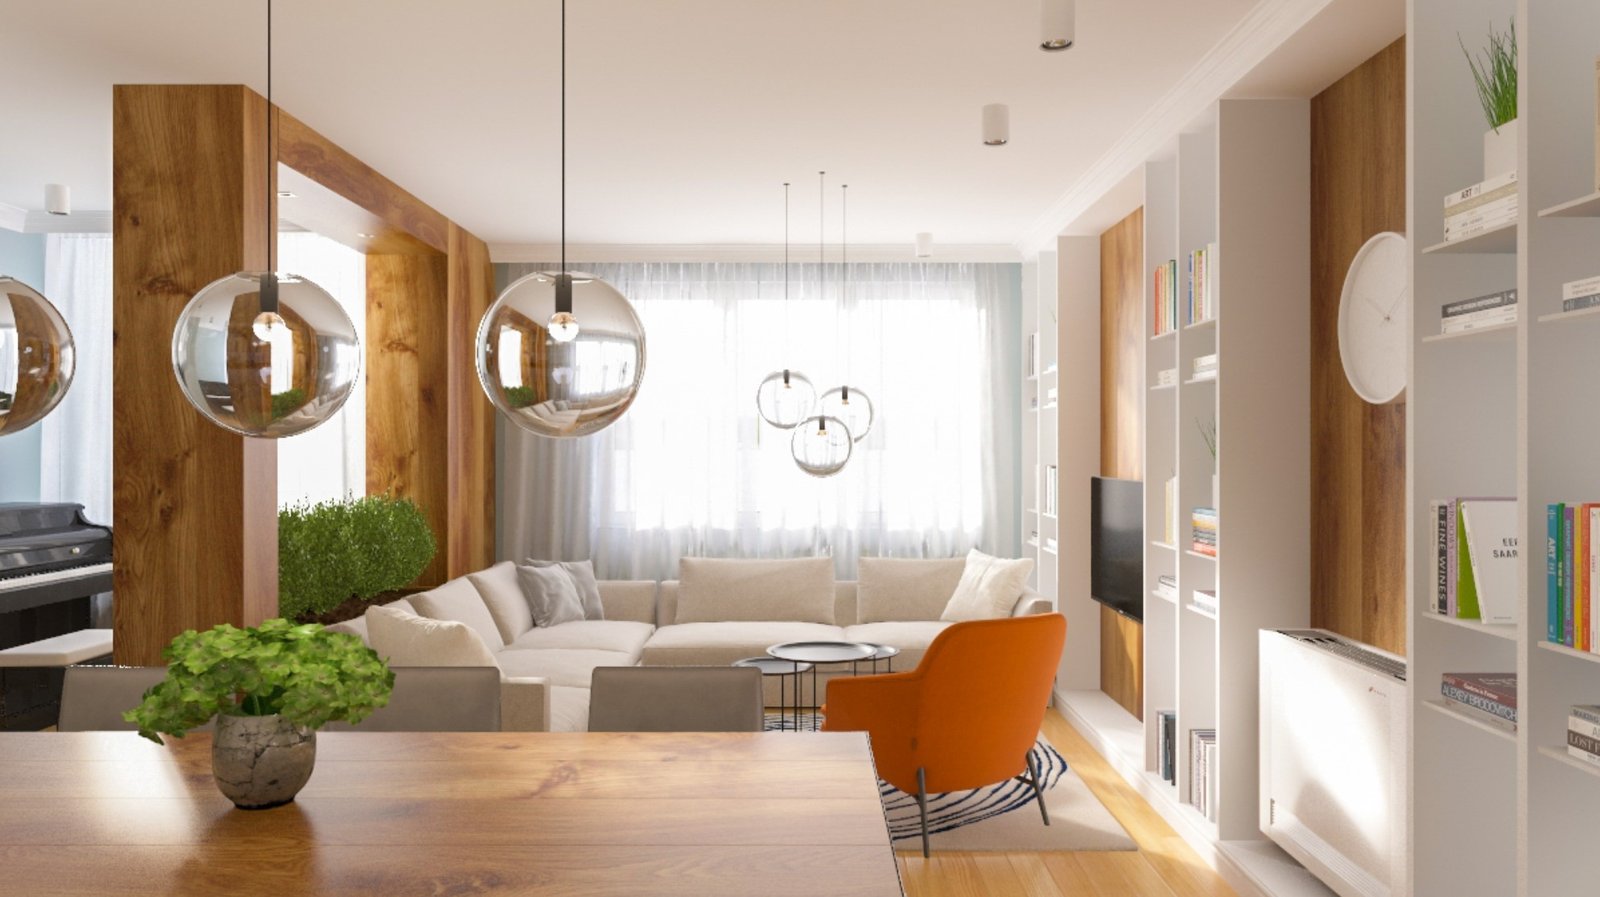 Stylish home renovation featuring a blend of wooden accents, contemporary spherical pendant lights, and a cozy living area with an orange accent chair